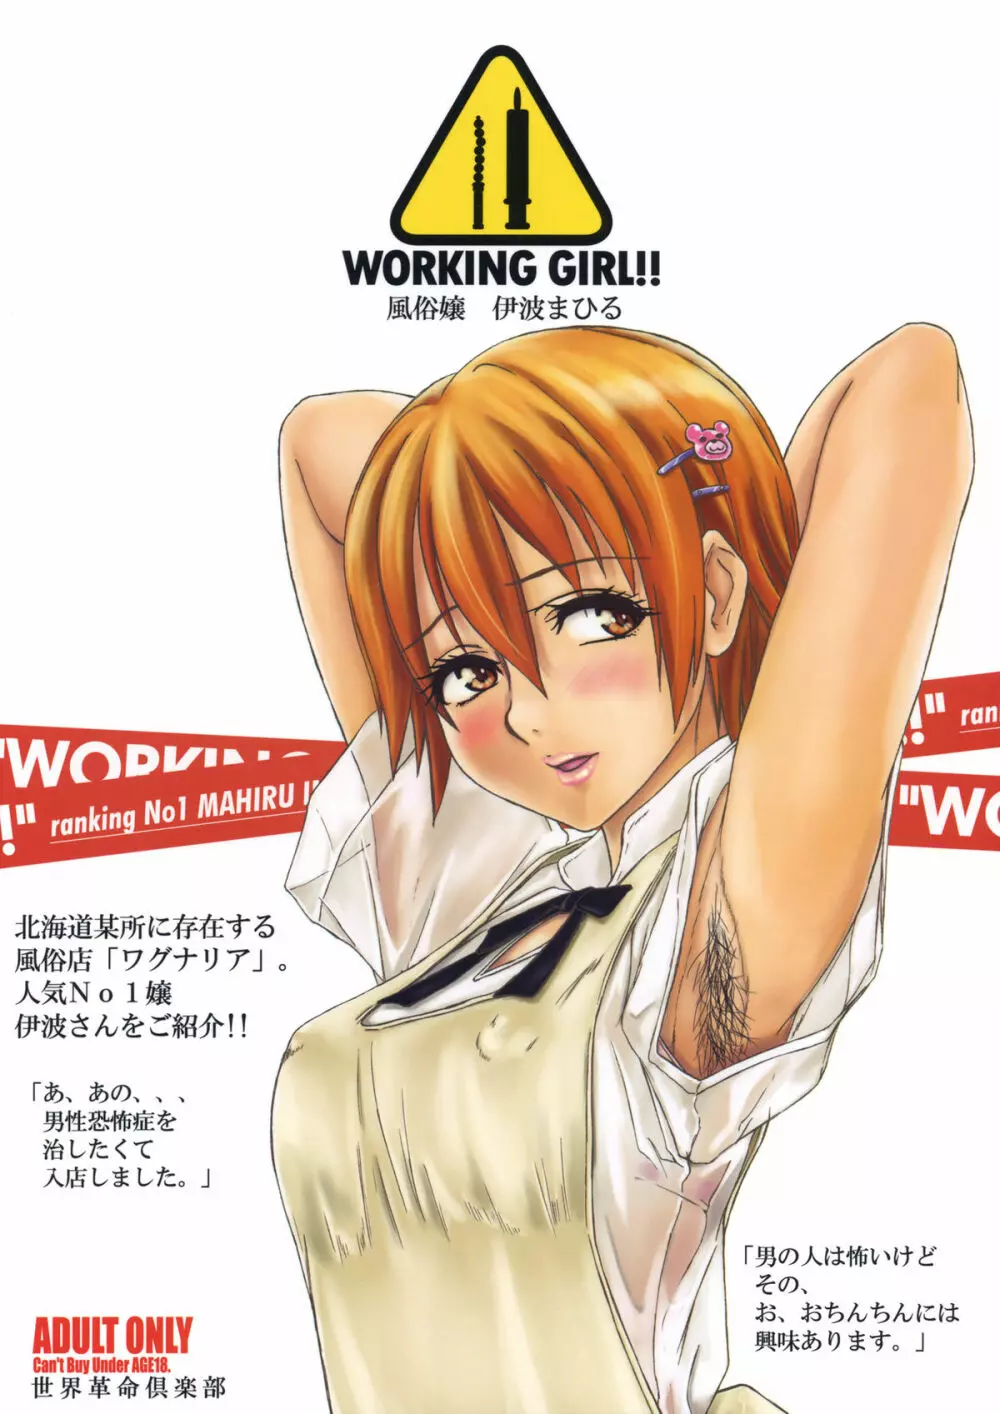 WORKING GIRL!! ranking No 1 風俗嬢 伊波まひる Page.38